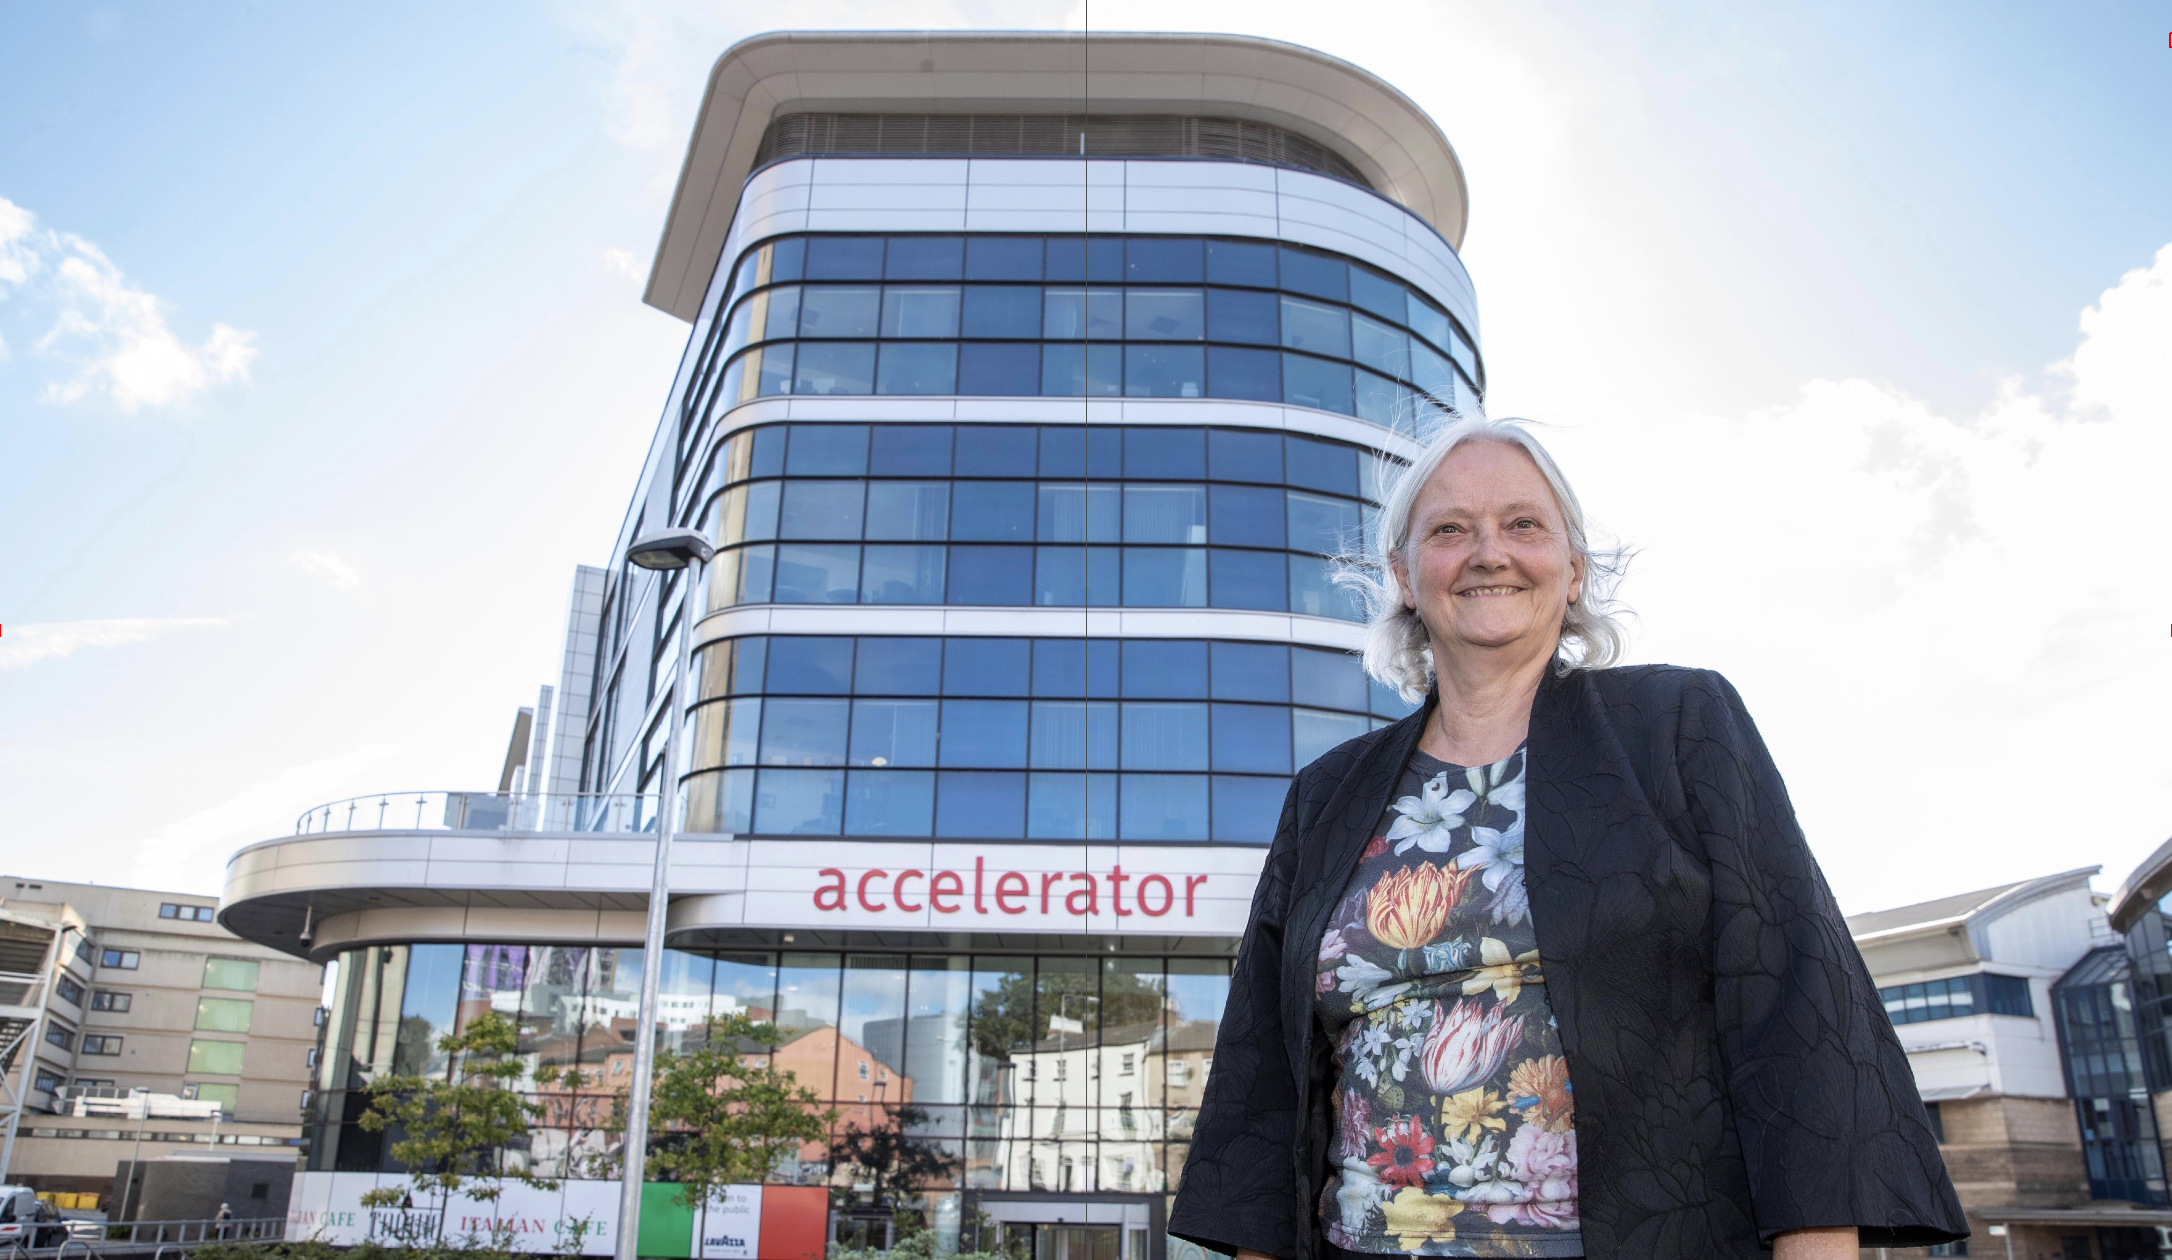 iiCON founding director Professor Janet Hemingway outside the Liverpool School of Tropical Medicine's Accelerator building. iiCON's Investment Zone funded Phase 3 project will see the creation of new high-containment robotic labs